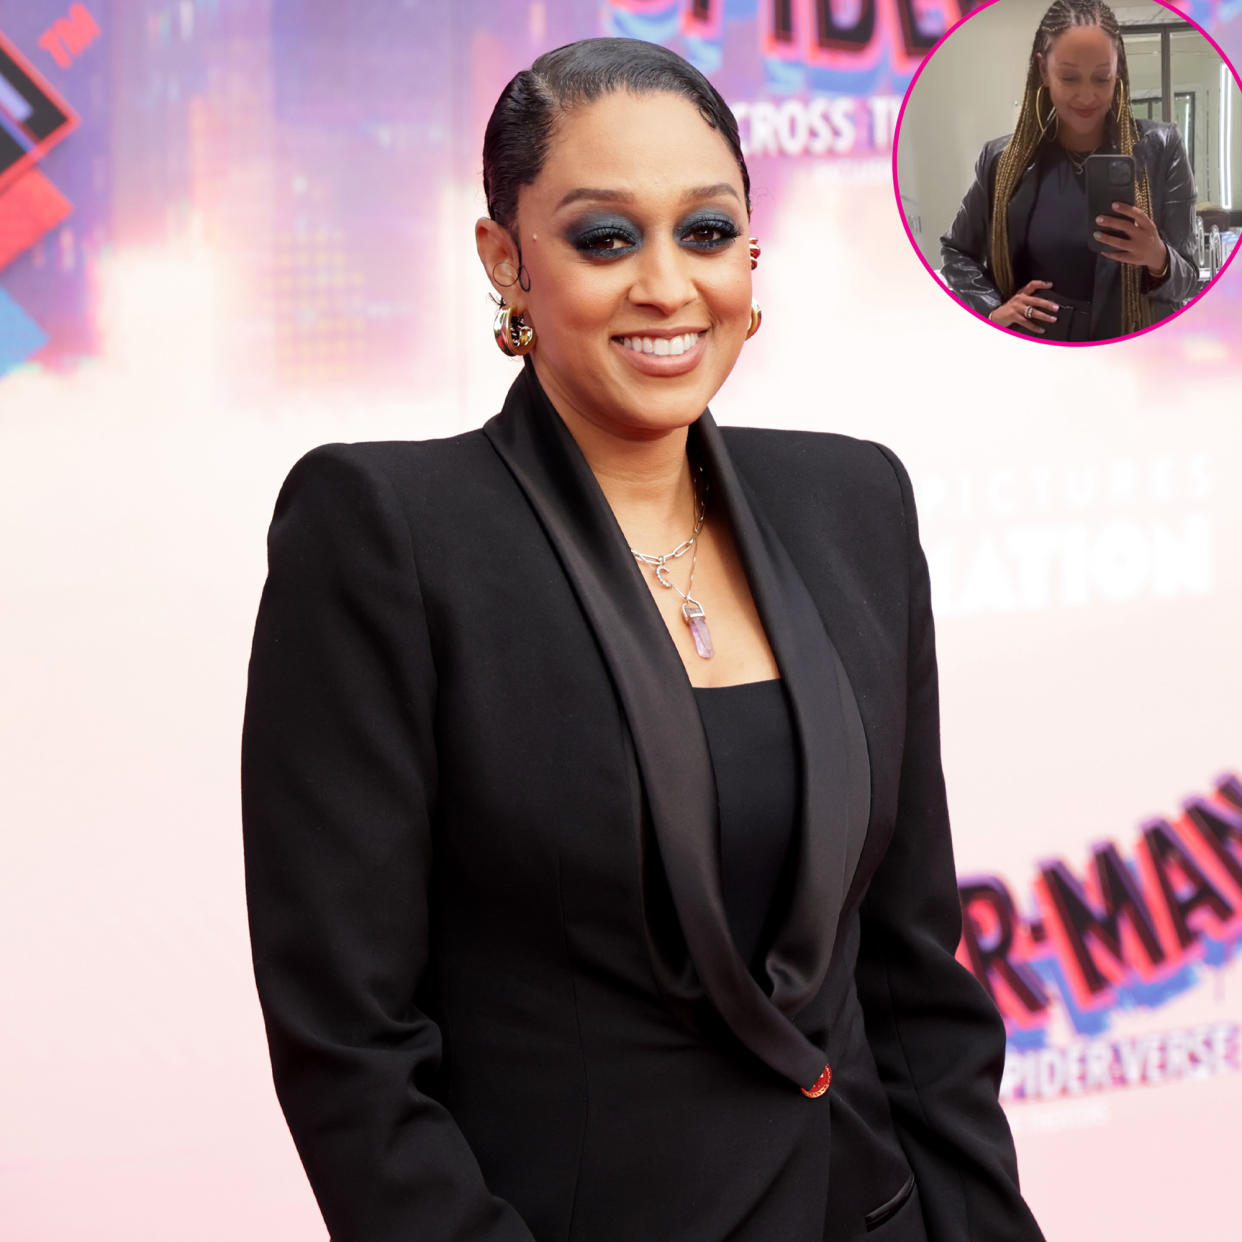 Tia Mowry switched up her straightened strands for long glamorous braids